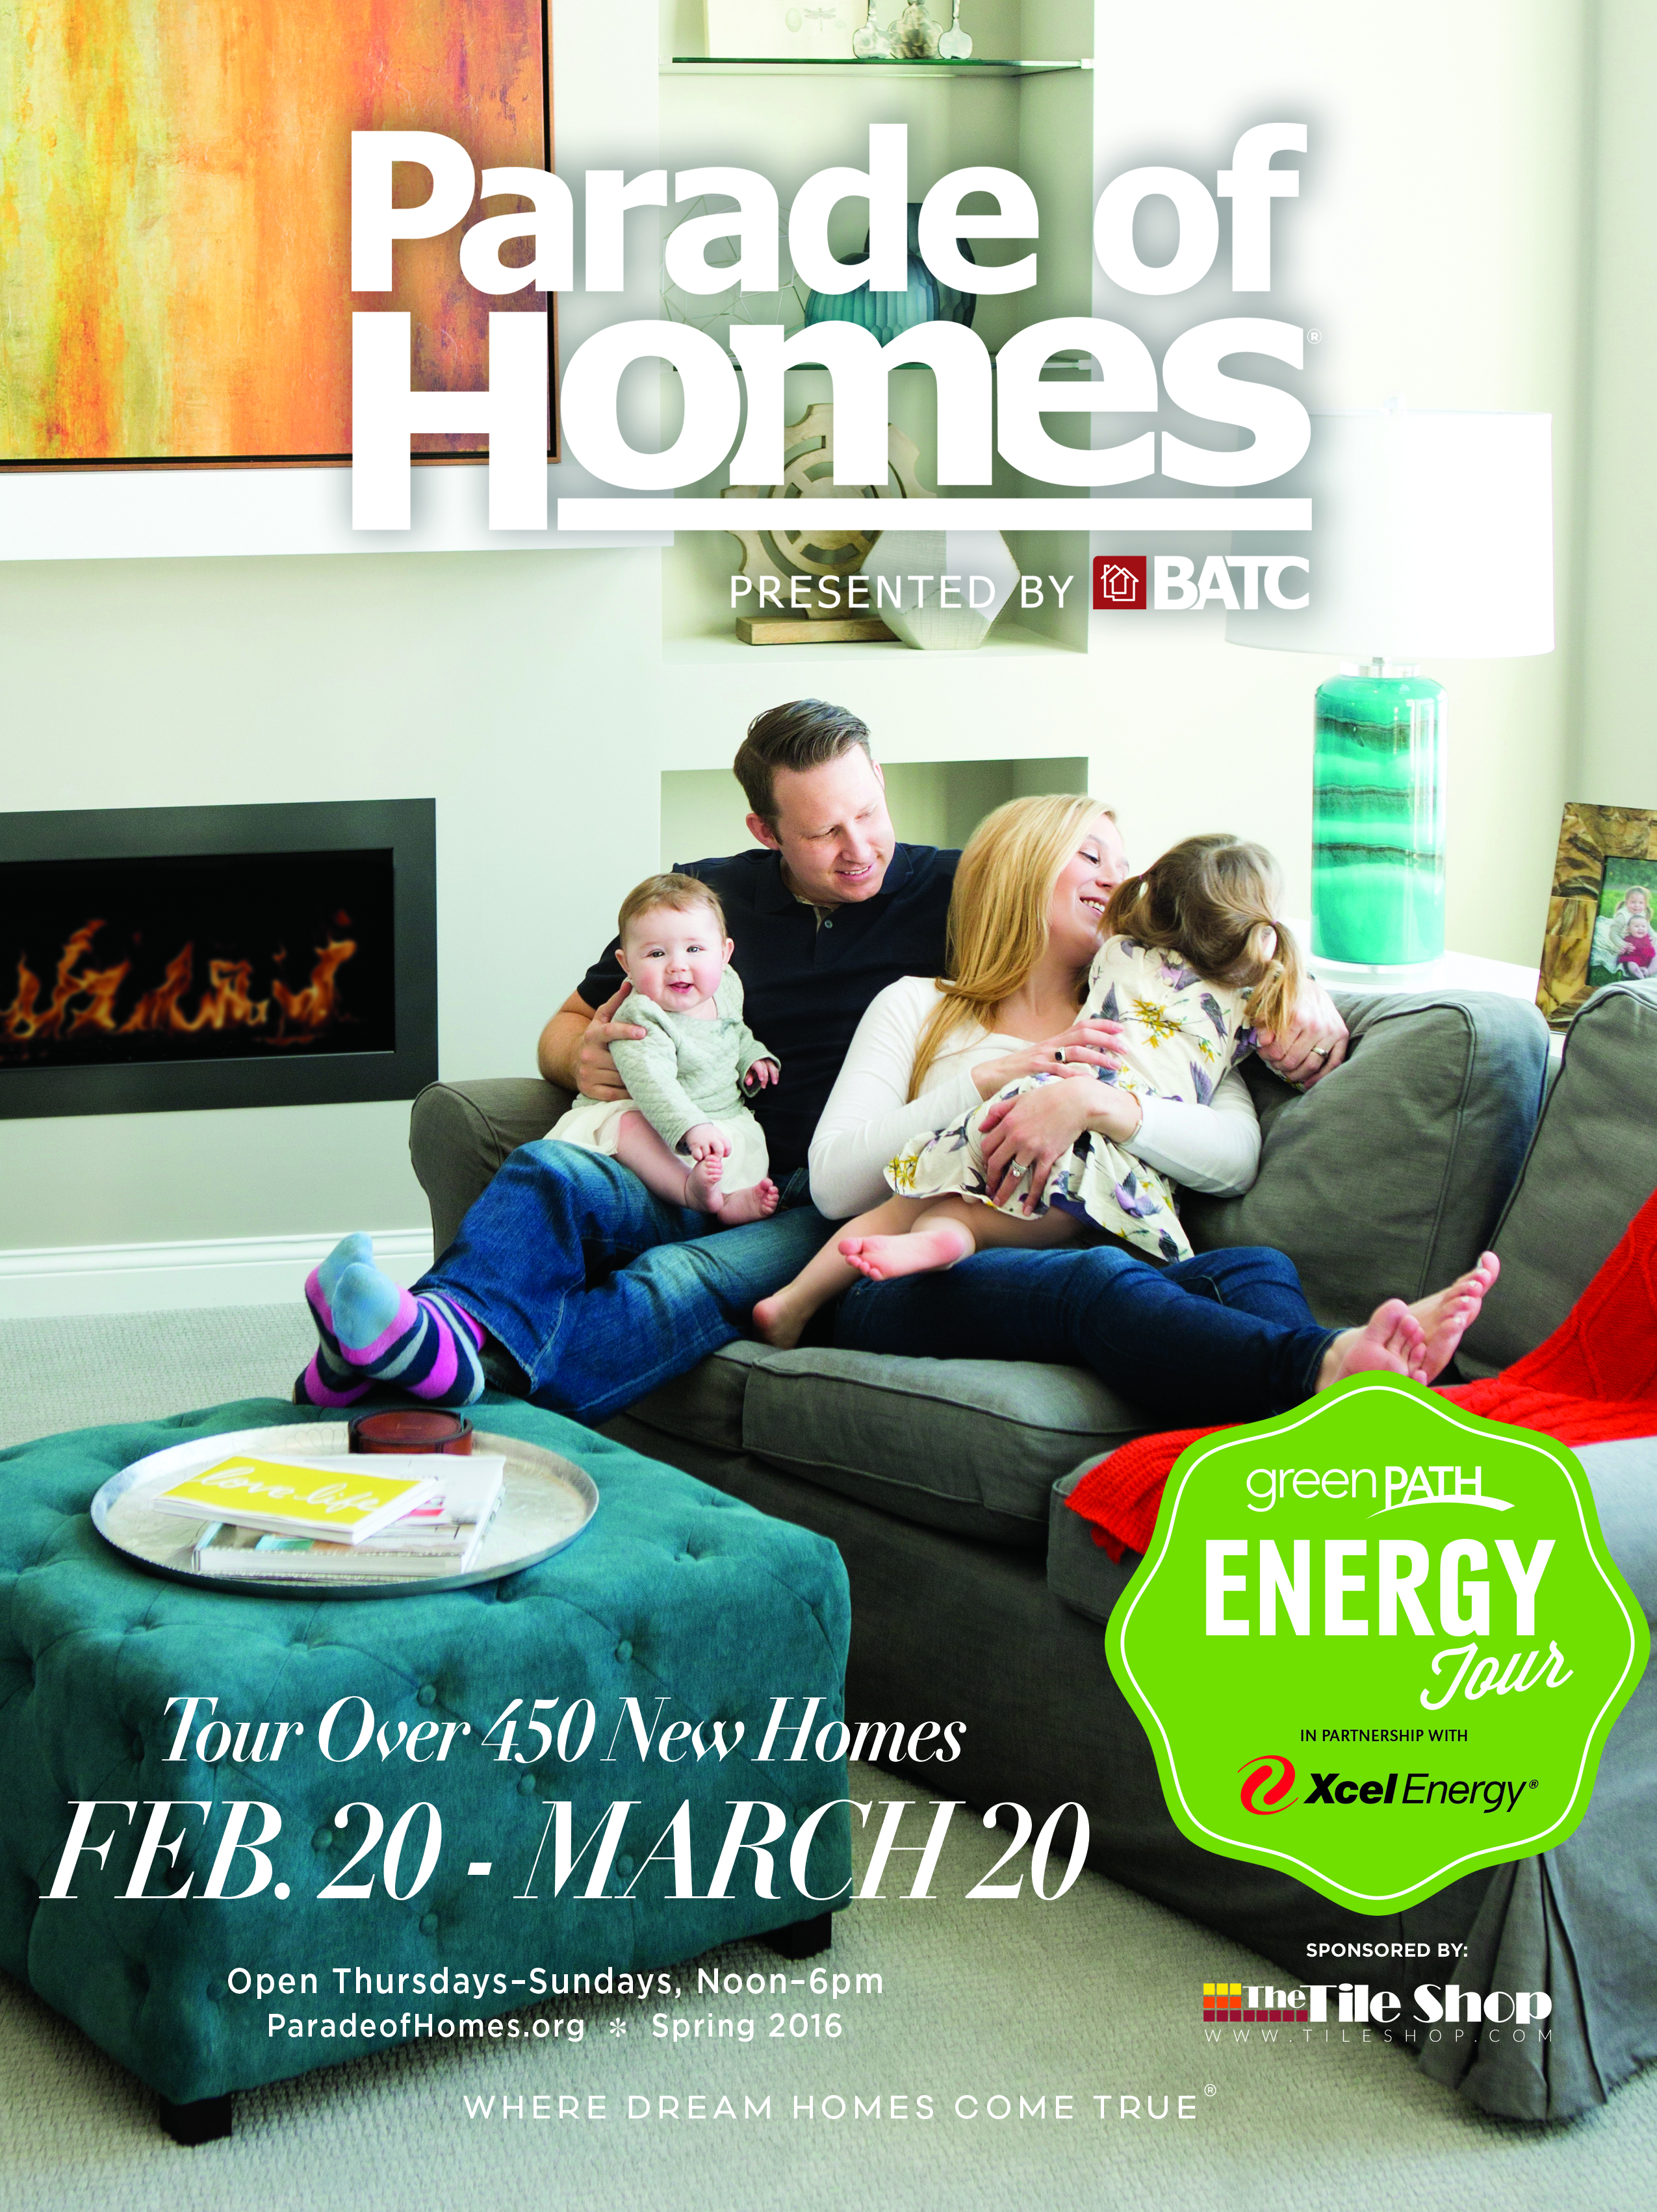 Image for Spring Parade of Homes Opens February 20, 2016